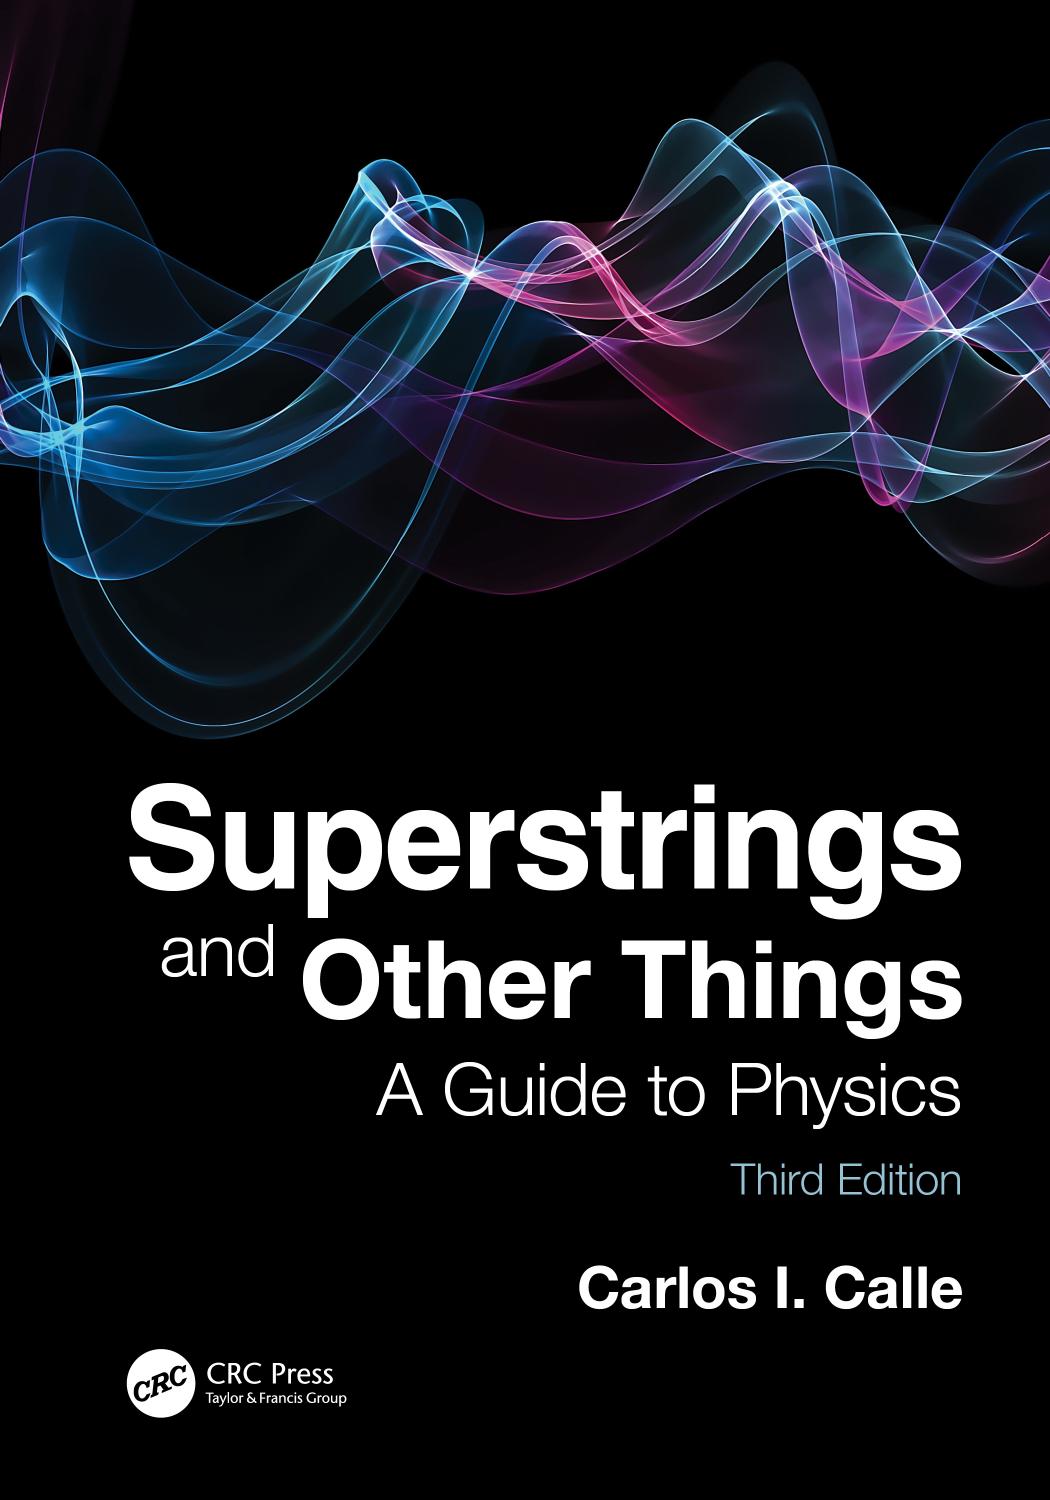 Superstrings and Other Things A Guide to Physics 3rd - Carlos I. Calle.jpg